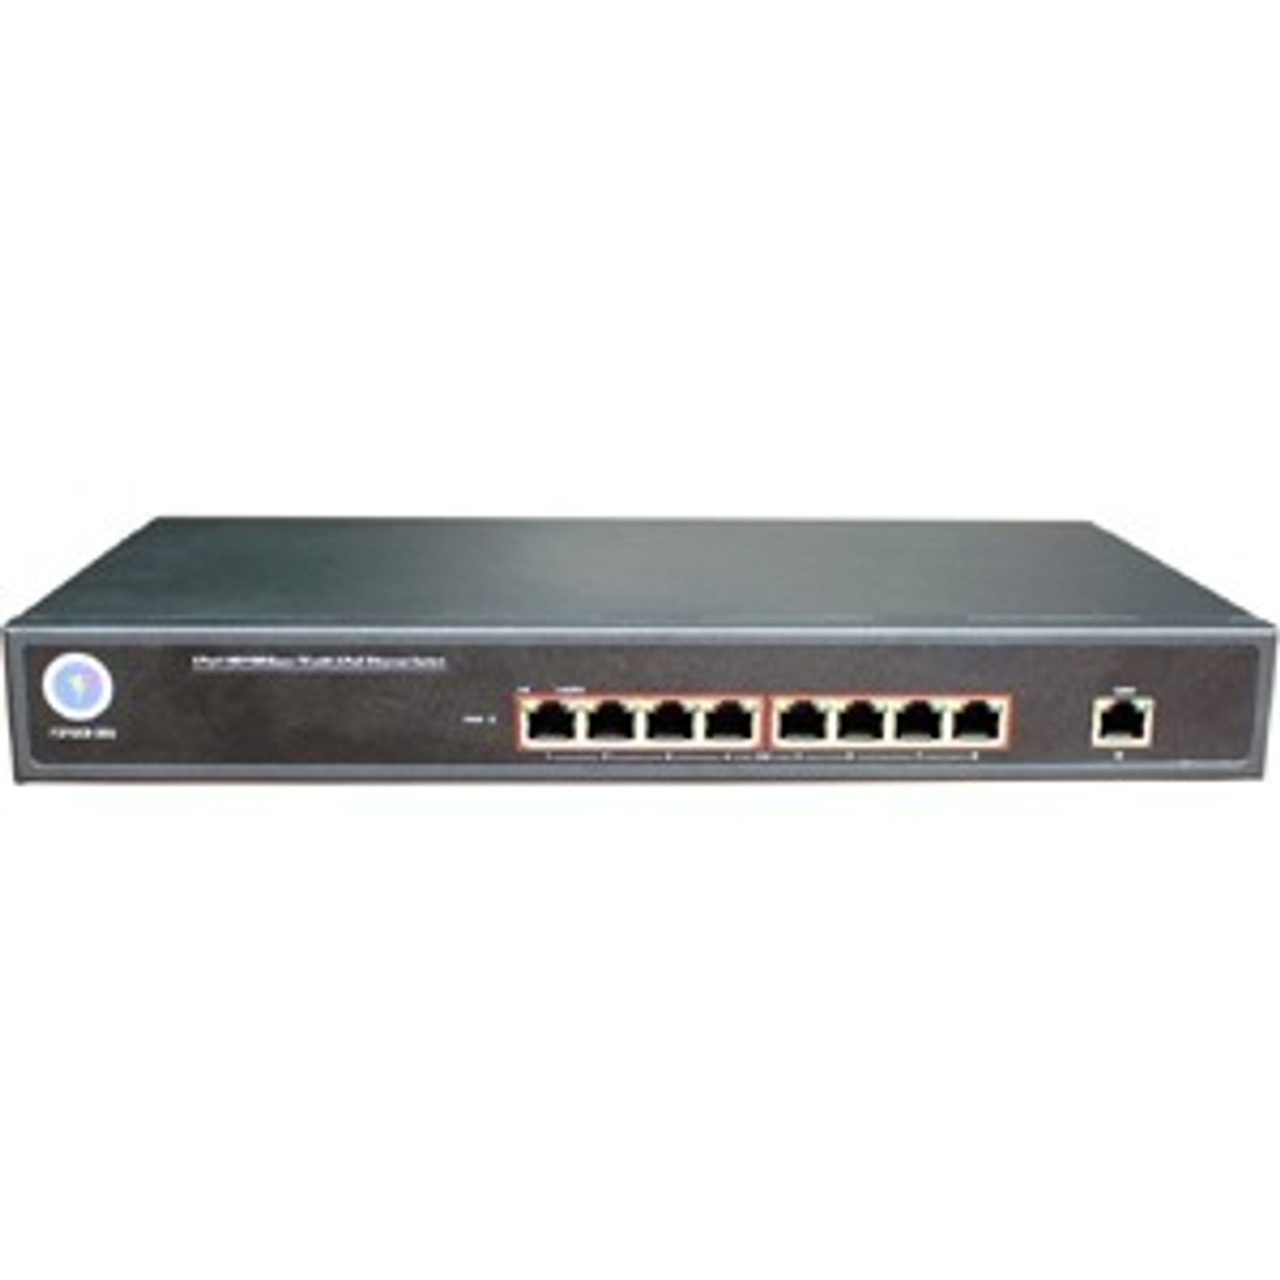 P3POE8-150G Preferred Power Products Ethernet Switch - 2 Layer Supported - 150 W Power Consumption - Lifetime Limited  (Refurbished)